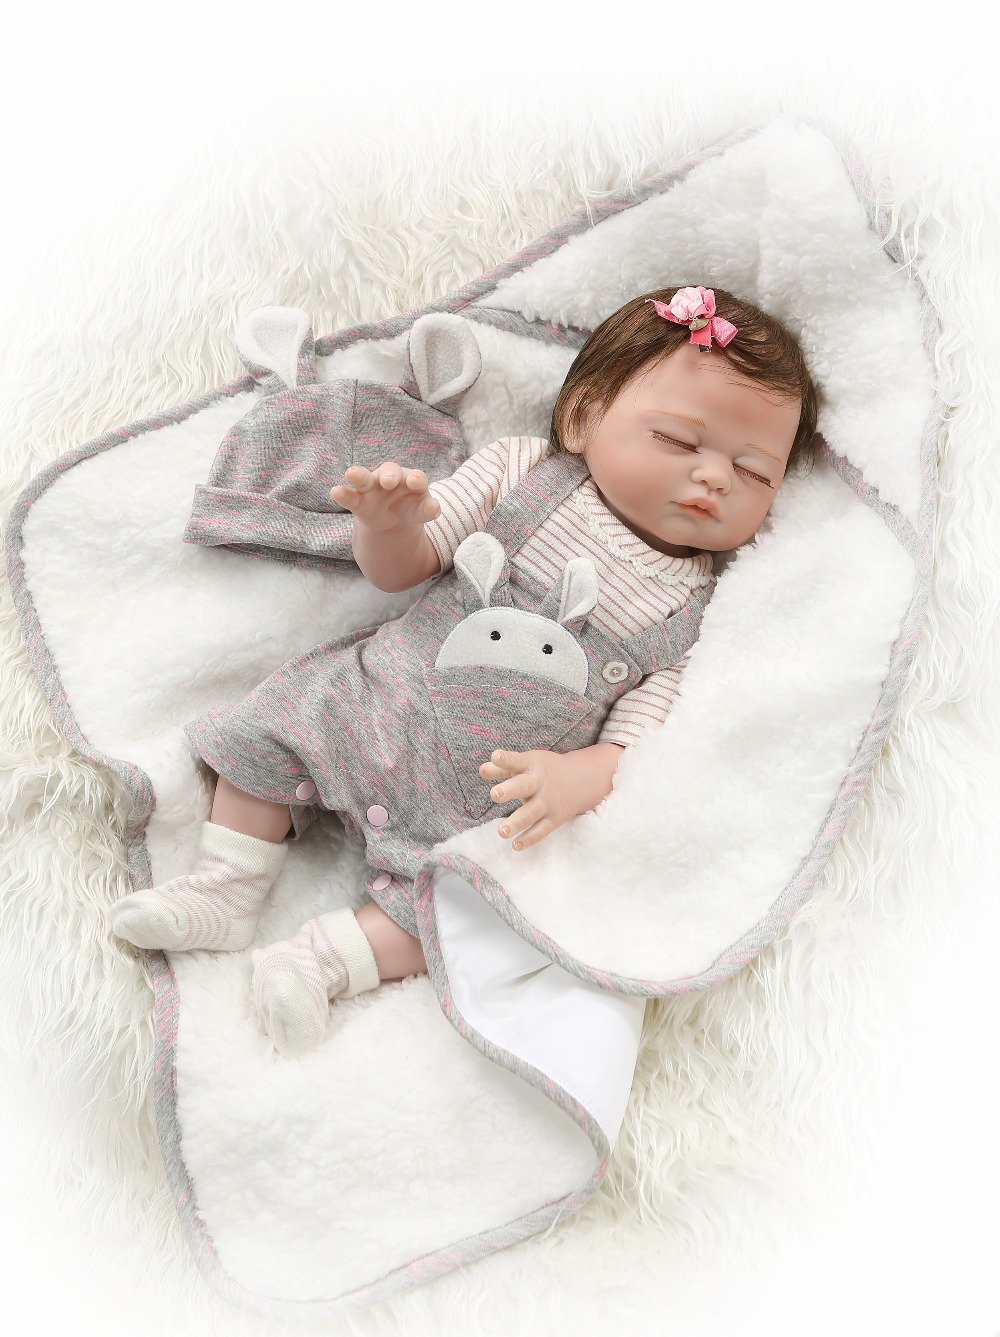 NPK 49CM full body silicone reborn baby doll twins boy and girl bebes reborn hand paint red skin rooted hair waterproof bath toy